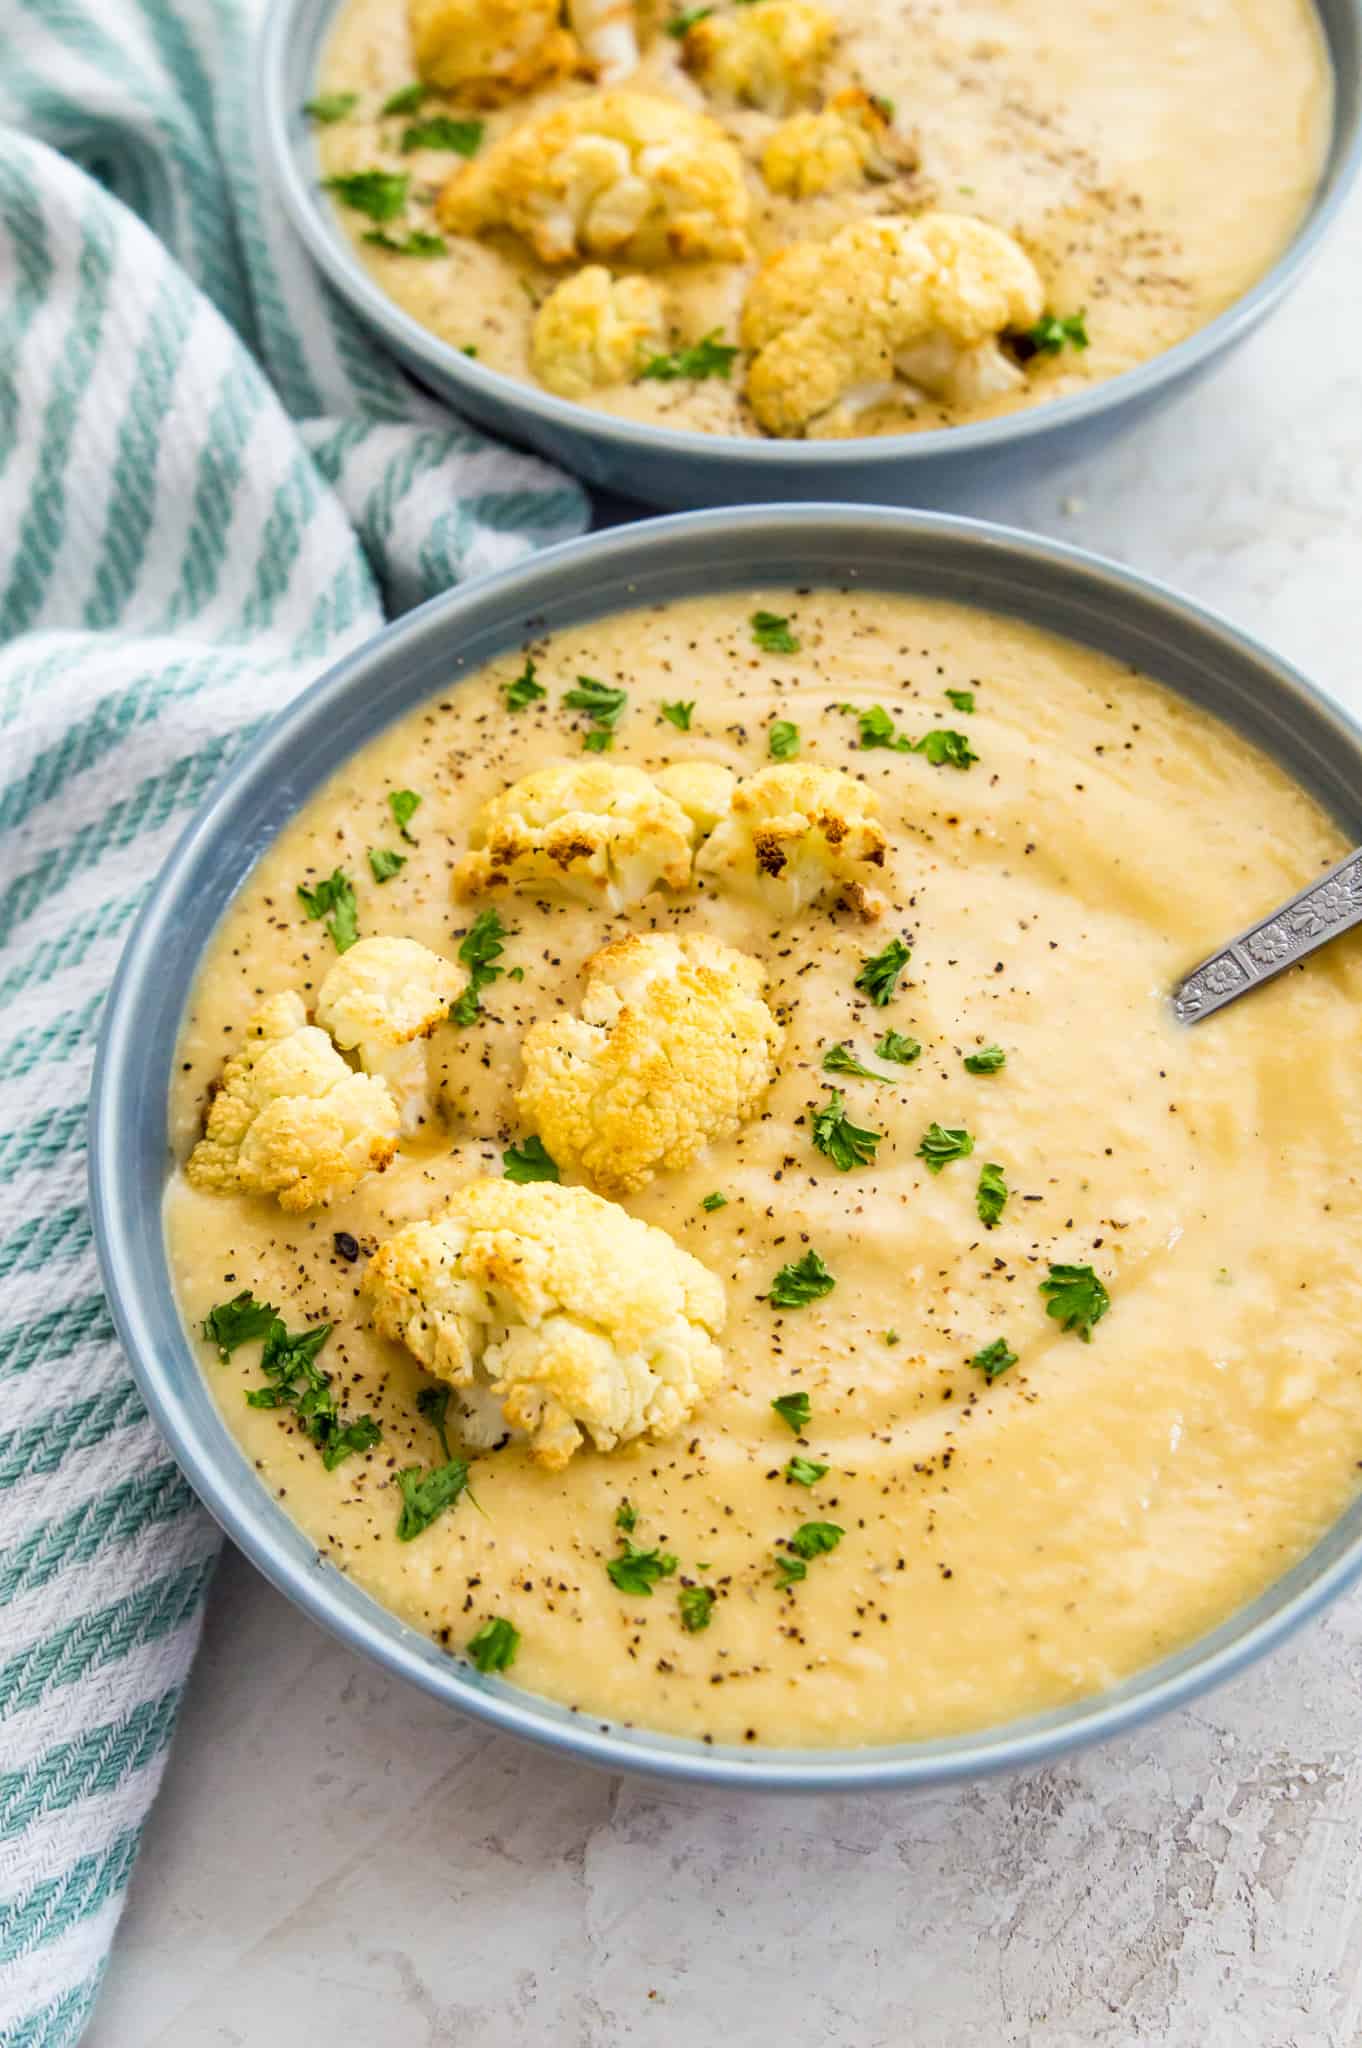 Bowls of Instant Pot Cauliflower Soup topped with roasted cauliflower and fresh parsley